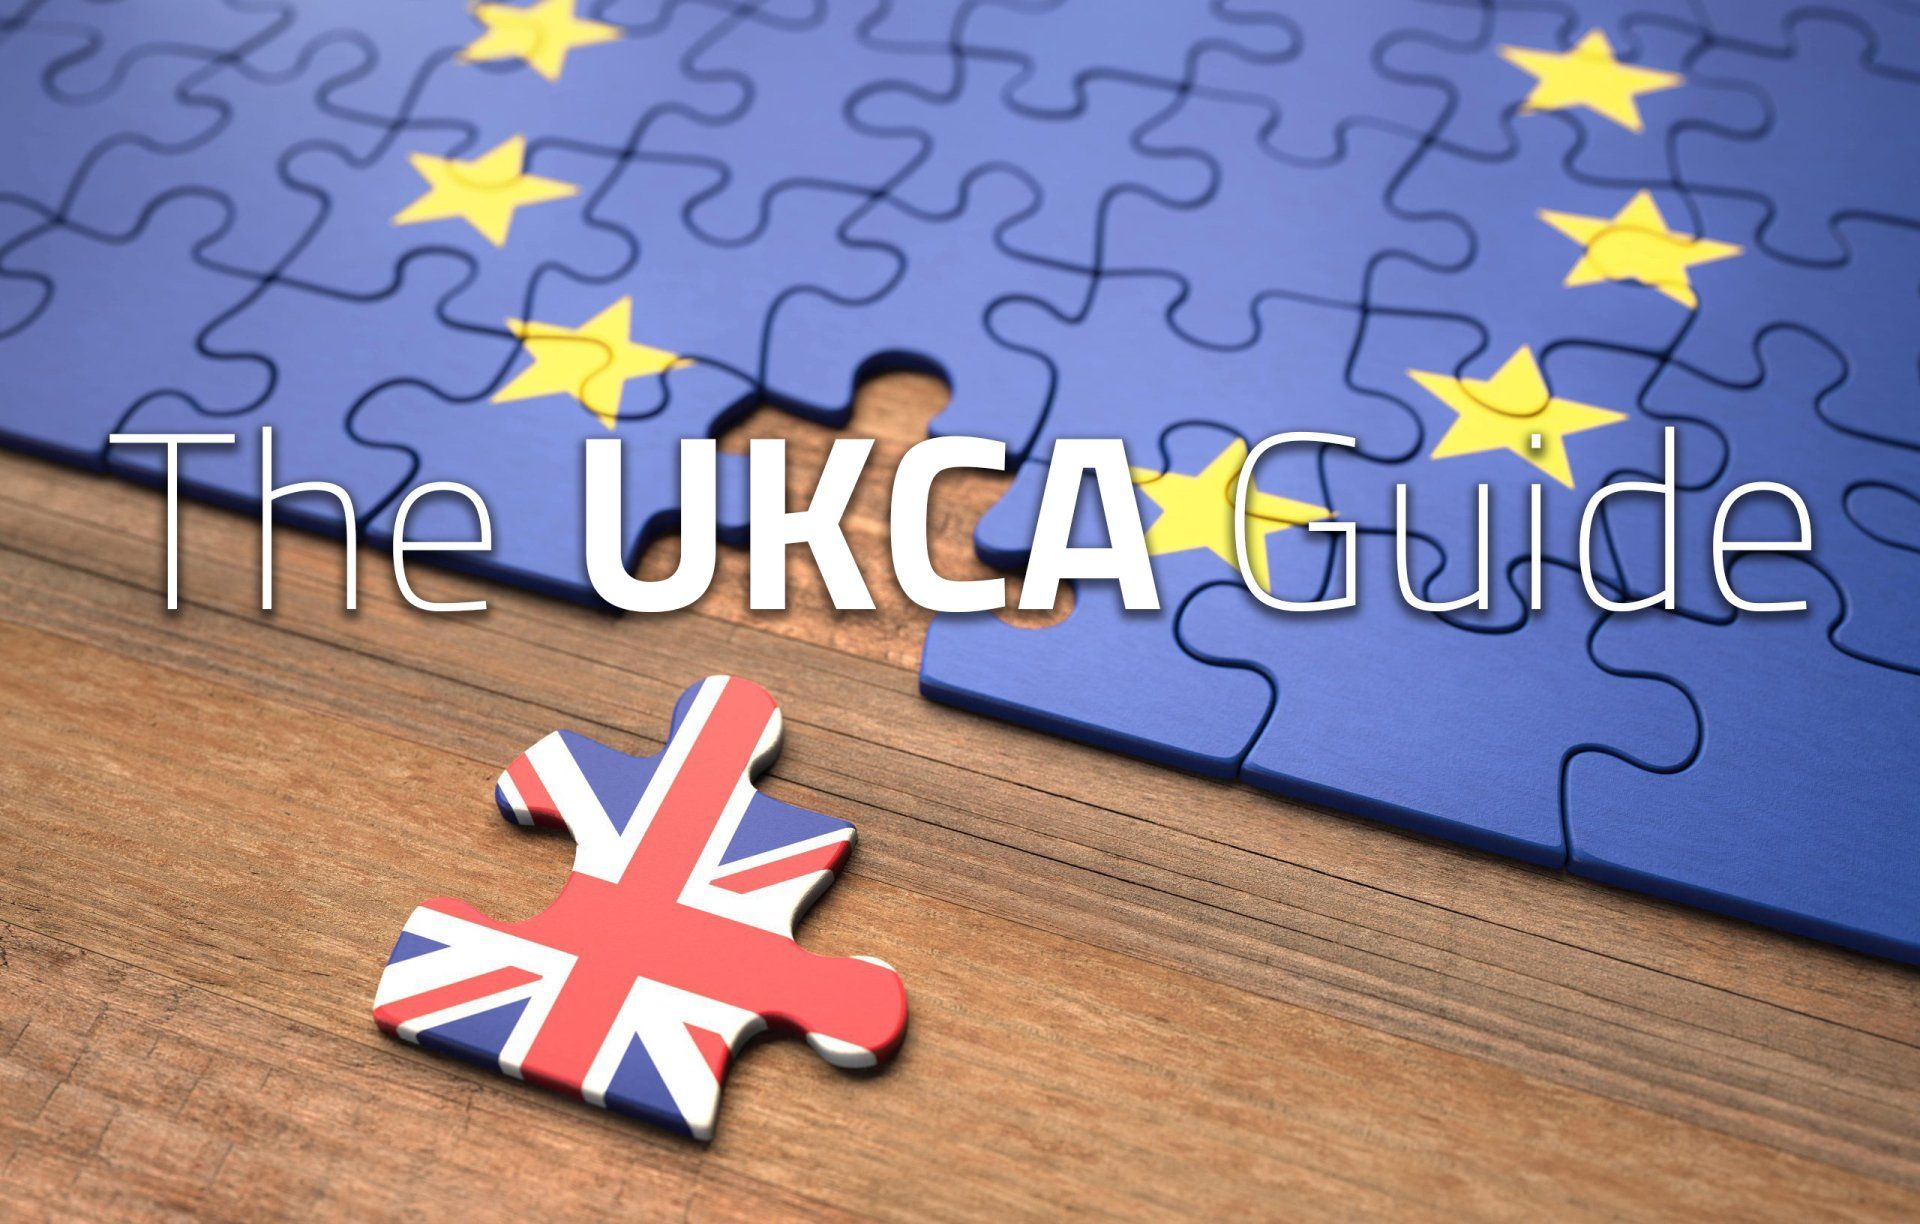 The UKCA Guide for manufacturers of technical products and medical devices